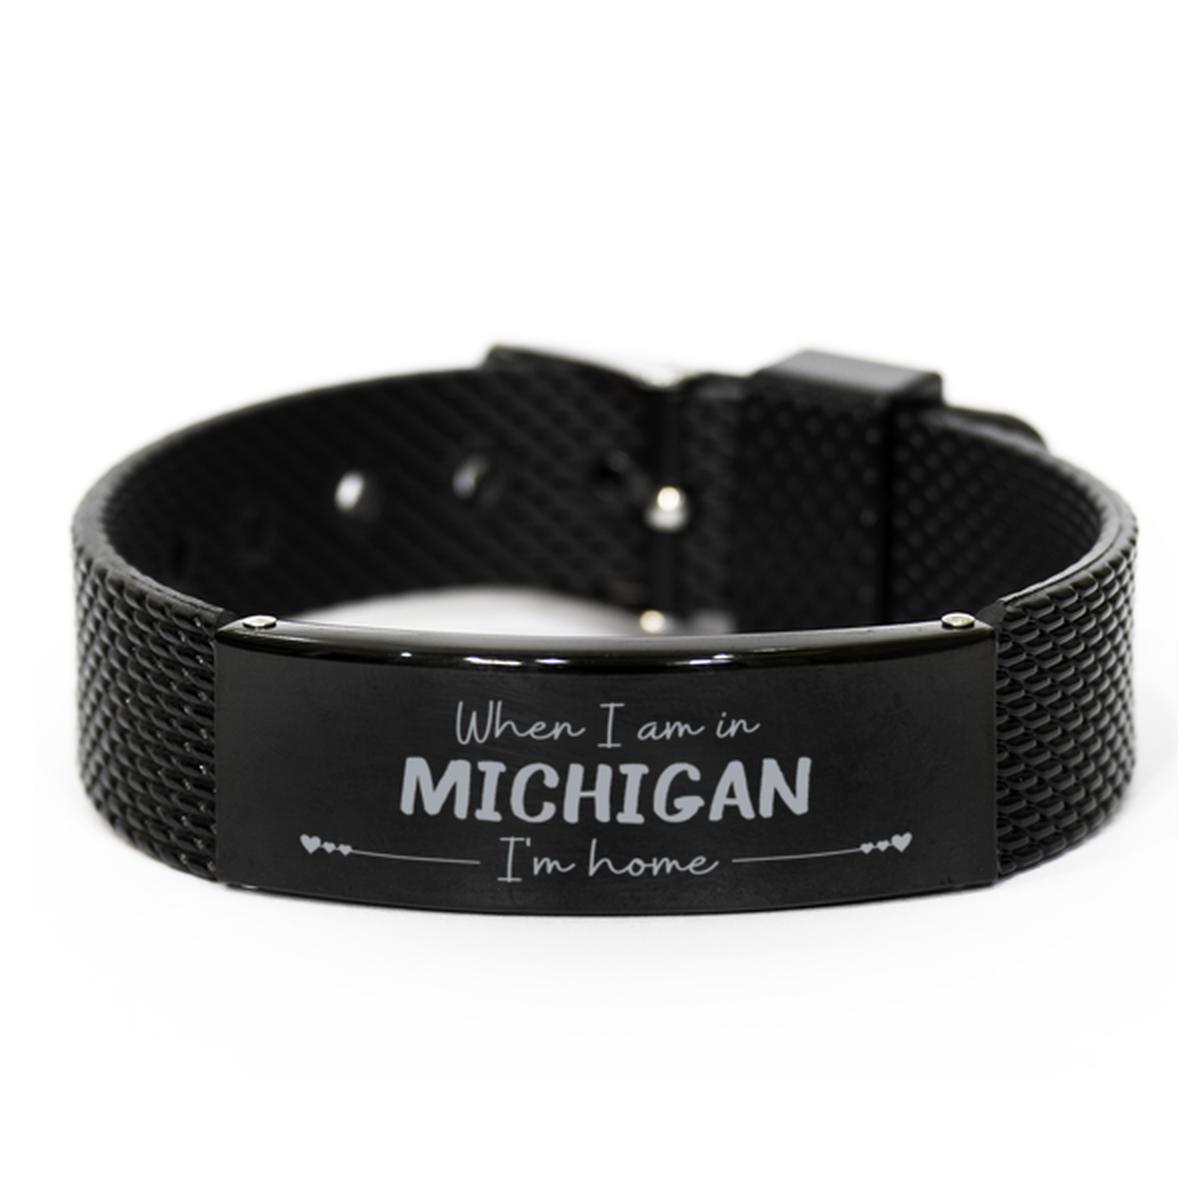 When I am in Michigan I'm home Black Shark Mesh Bracelet, Cheap Gifts For Michigan, State Michigan Birthday Gifts for Friends Coworker